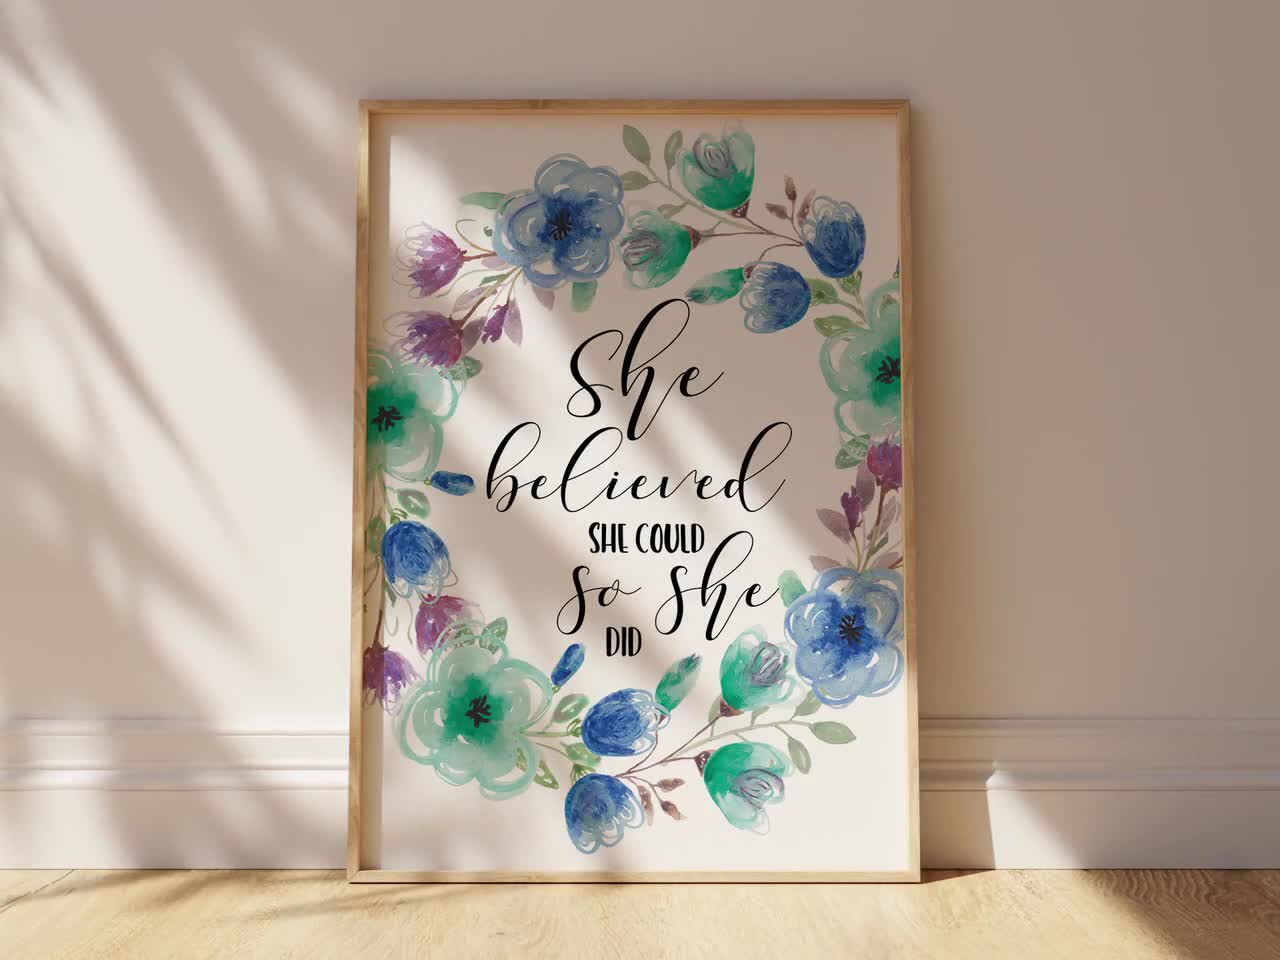 Gift, She Believed Teenage Girl, Could Did She for Girl Nursery Decor Her for - Girls, Art Wall so Bedroom Etsy Graduation Decor, Quotes Wall She